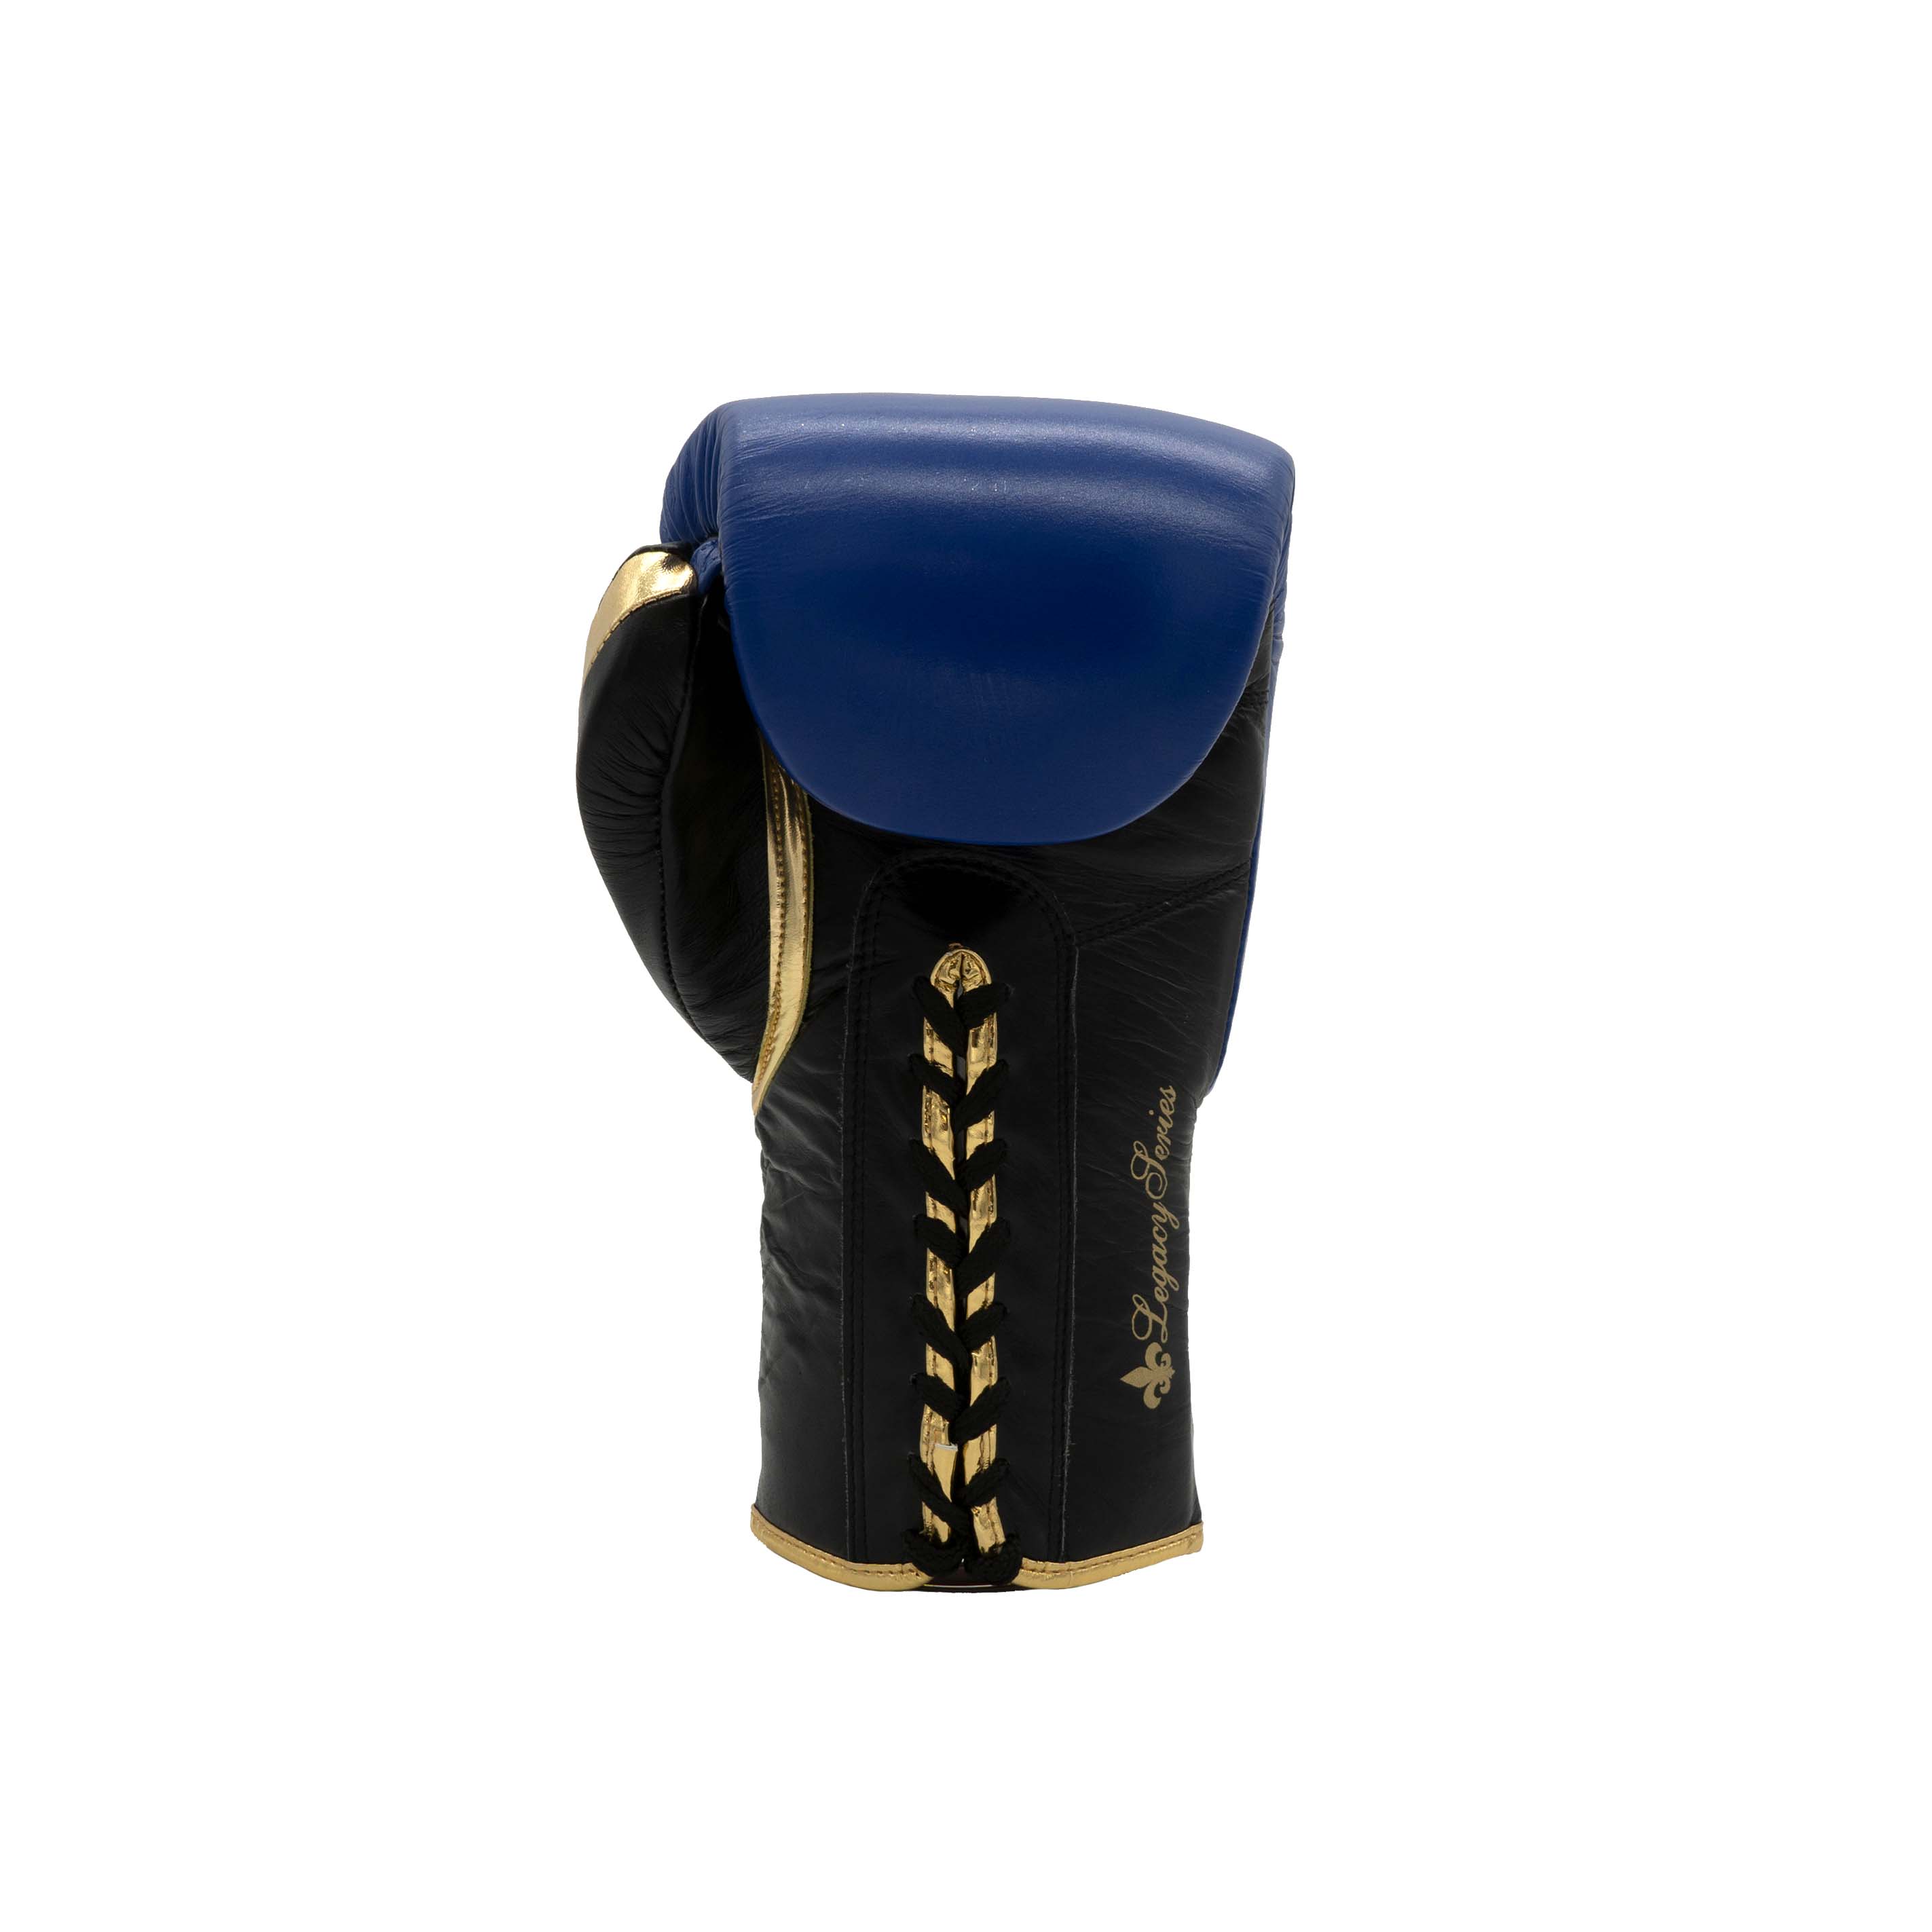 Ringside Boxing Legacy Series Lace Boxing Gloves in blue on white background reverse angle